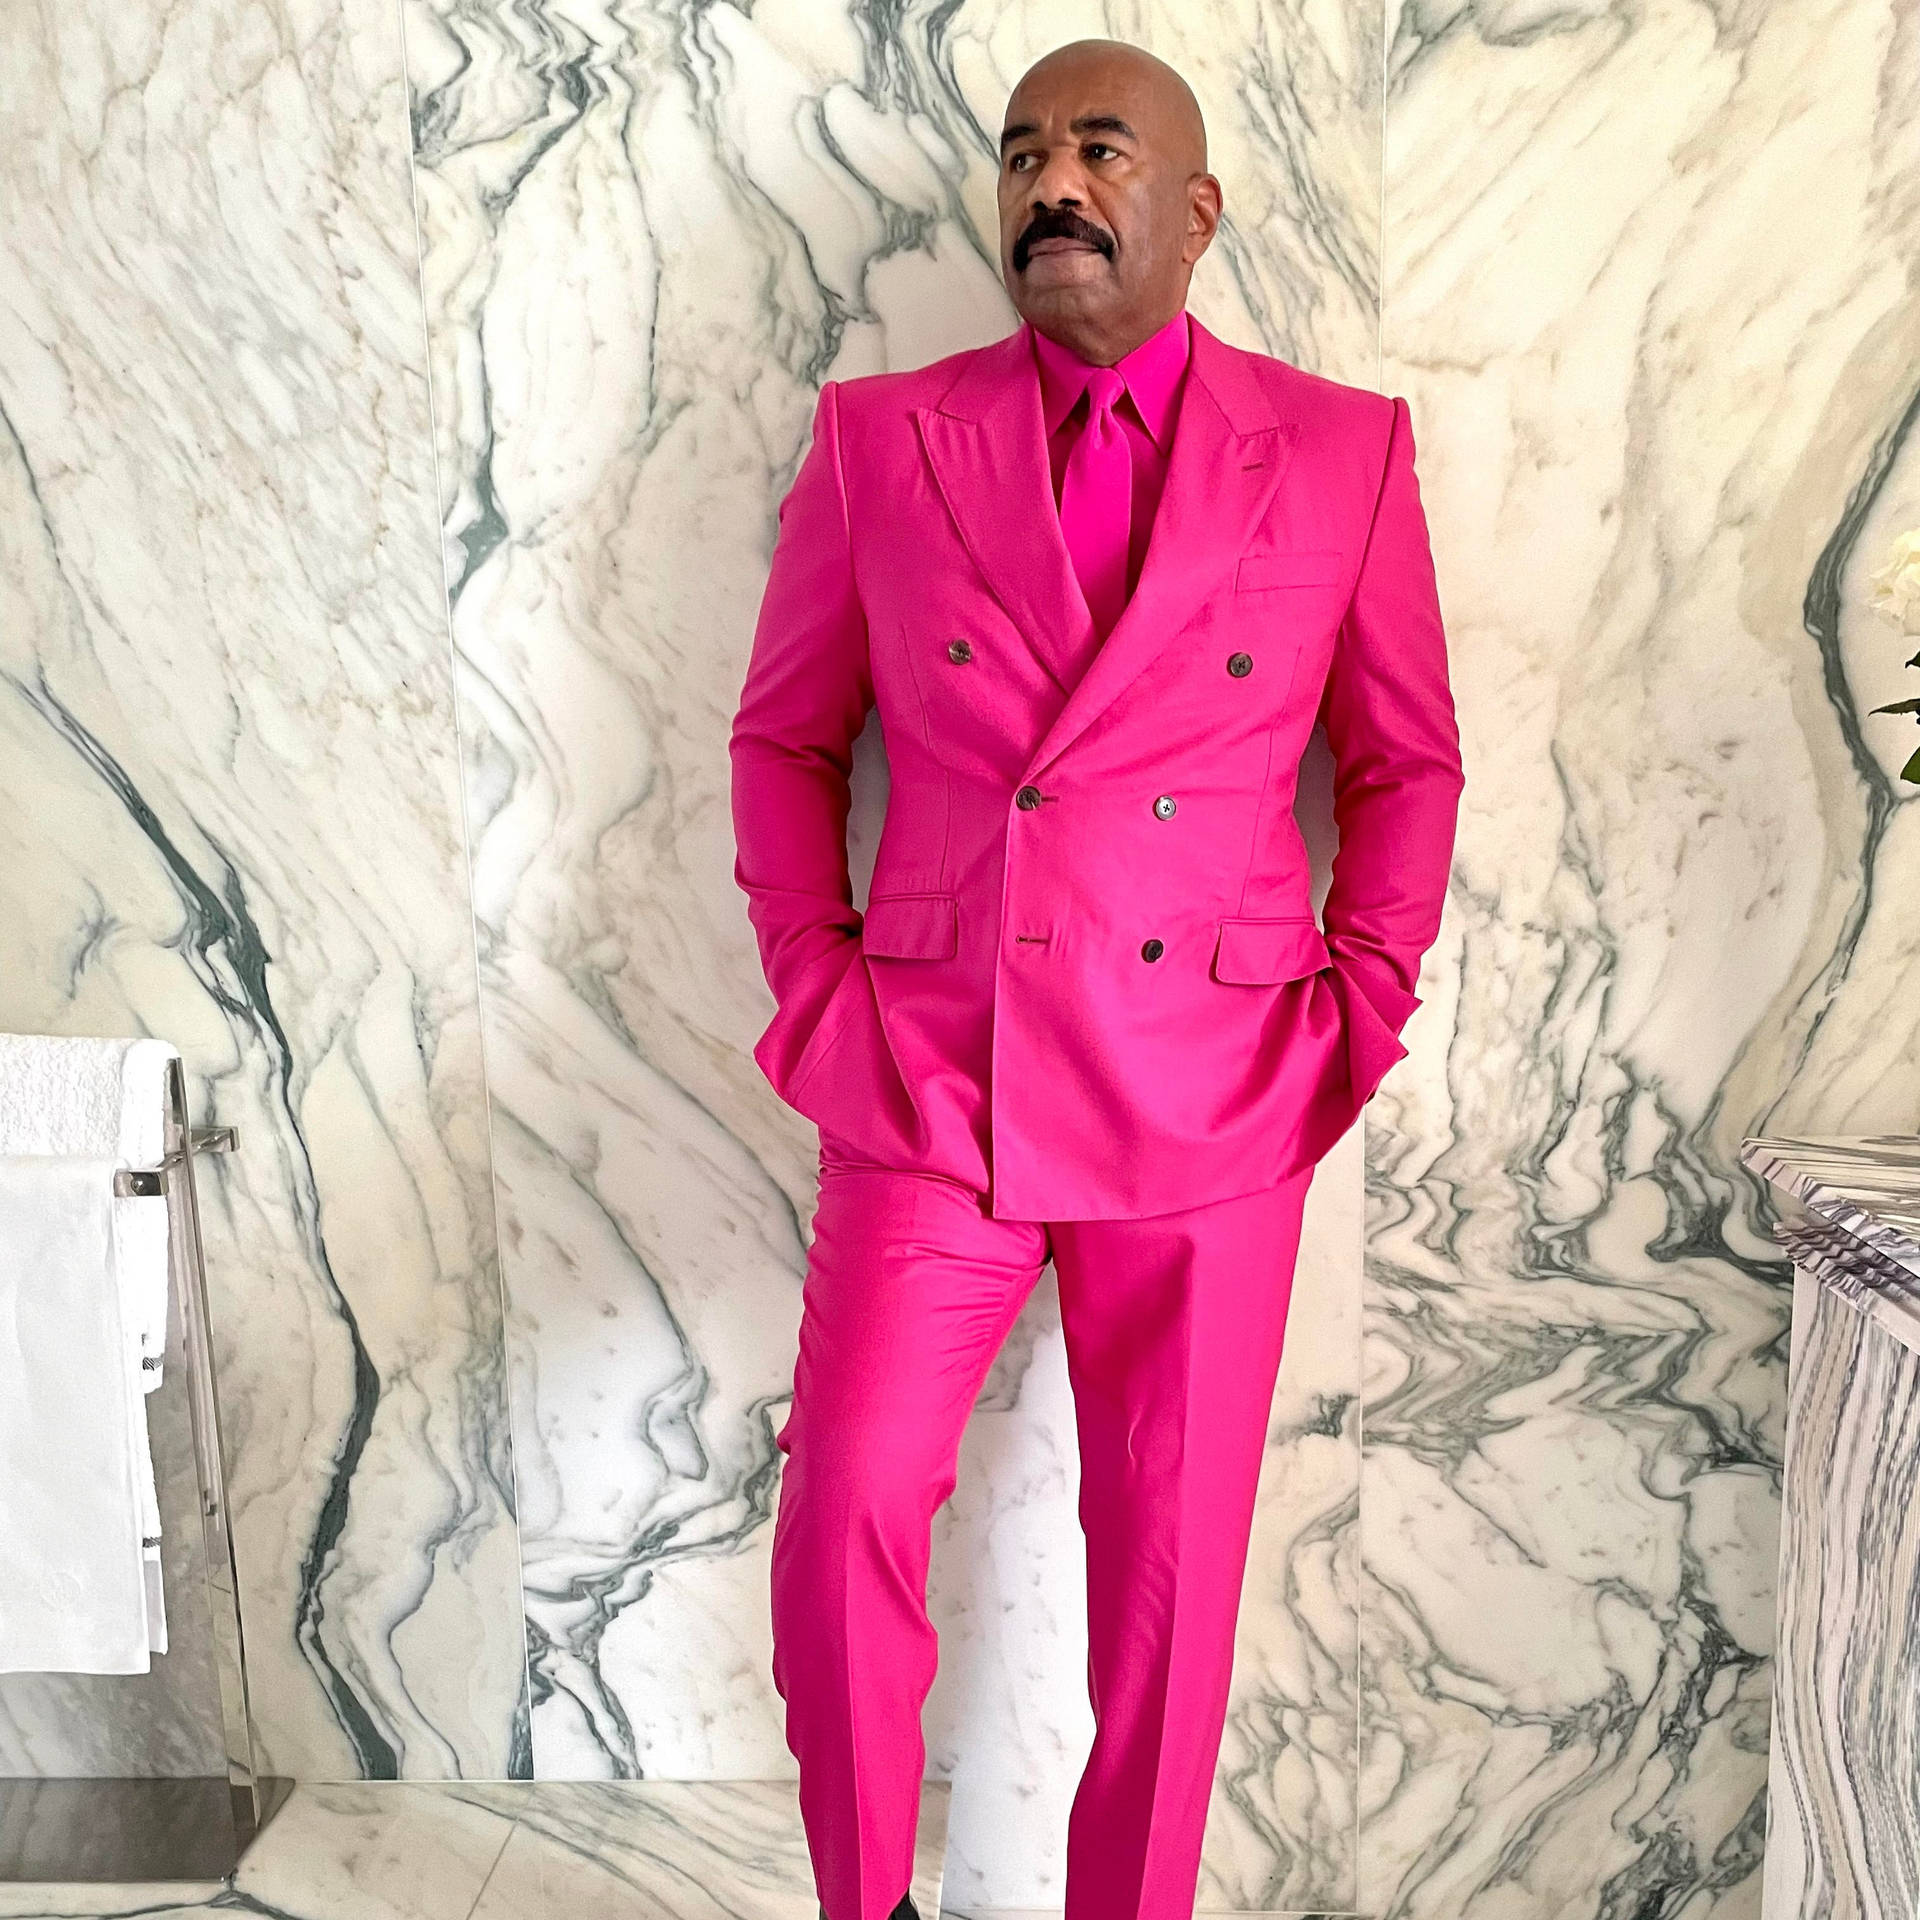 Steve Harvey Vibrantly Stands Out In A Hot Pink Suit